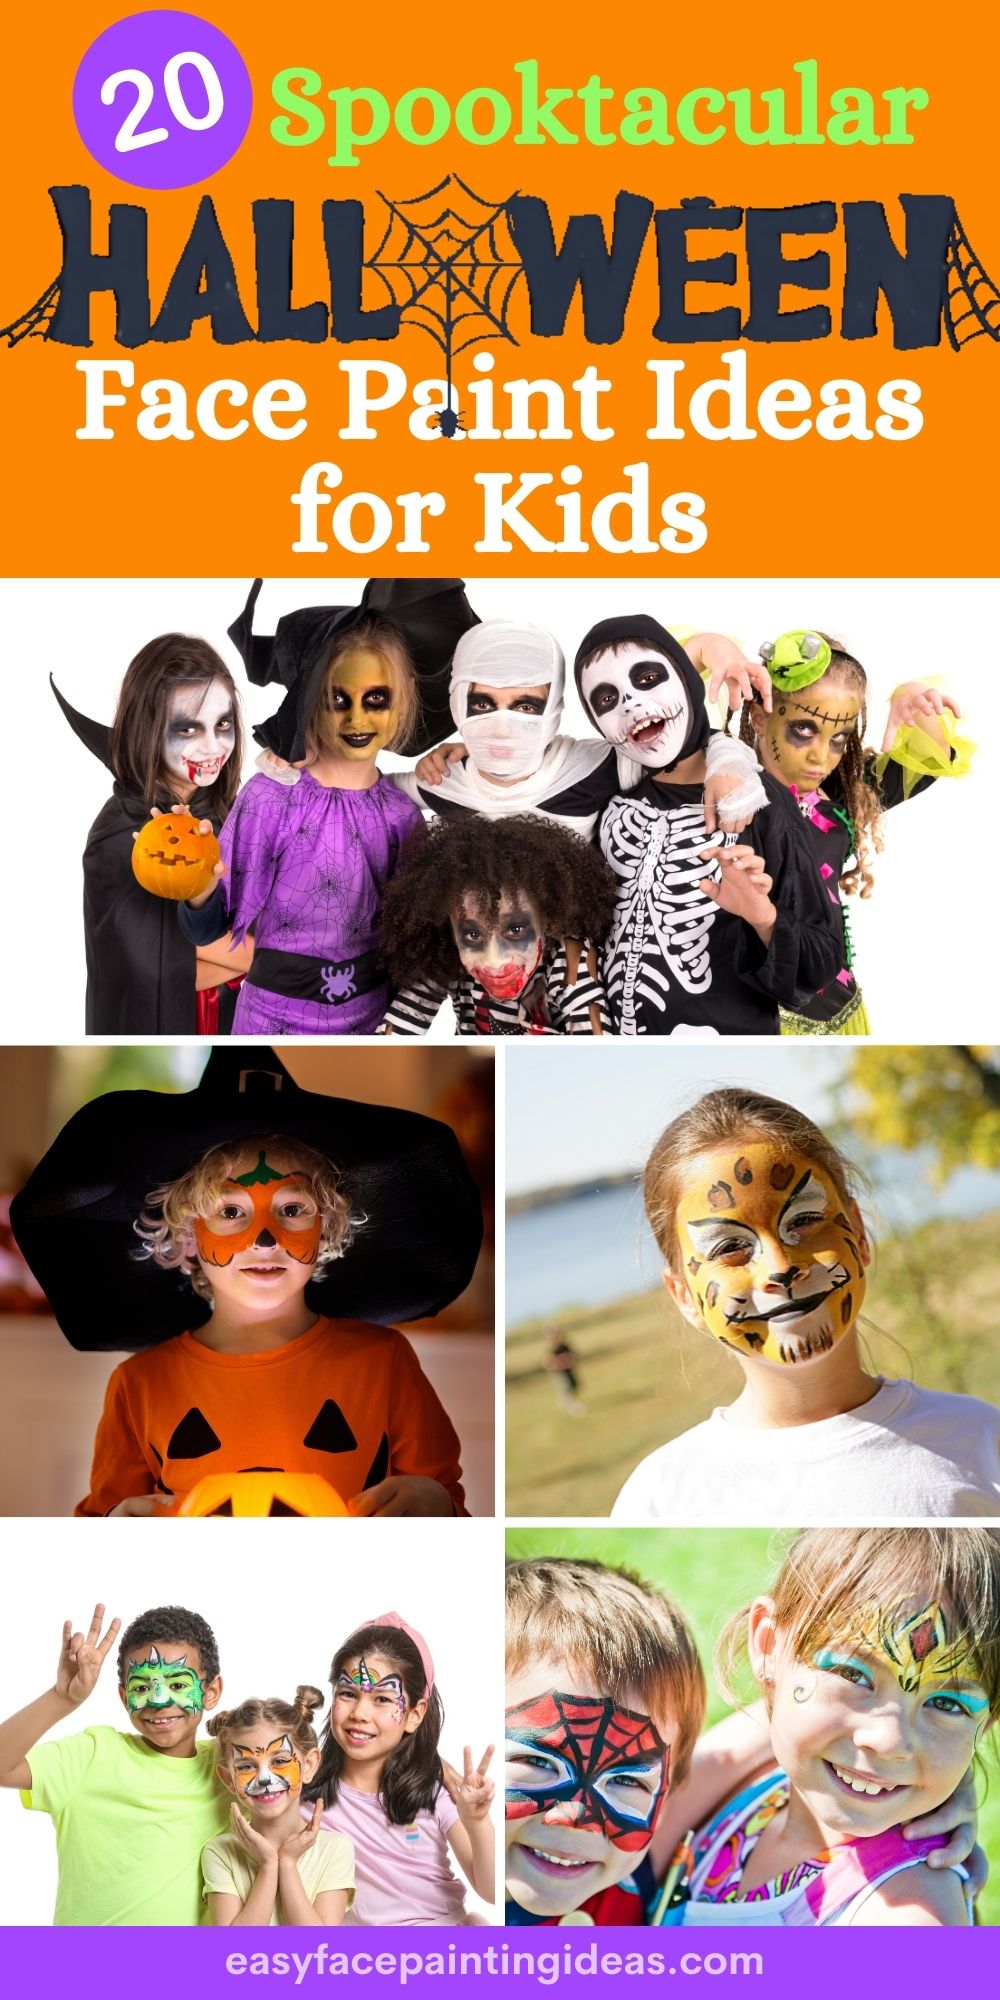 collage of images showing various halloween face paint ideas for kids, including pumpkin, vampire, witch, mummy, skeleton, zombie, clown, tiger, dinosaur, unicorn, spiderman, and princess. 